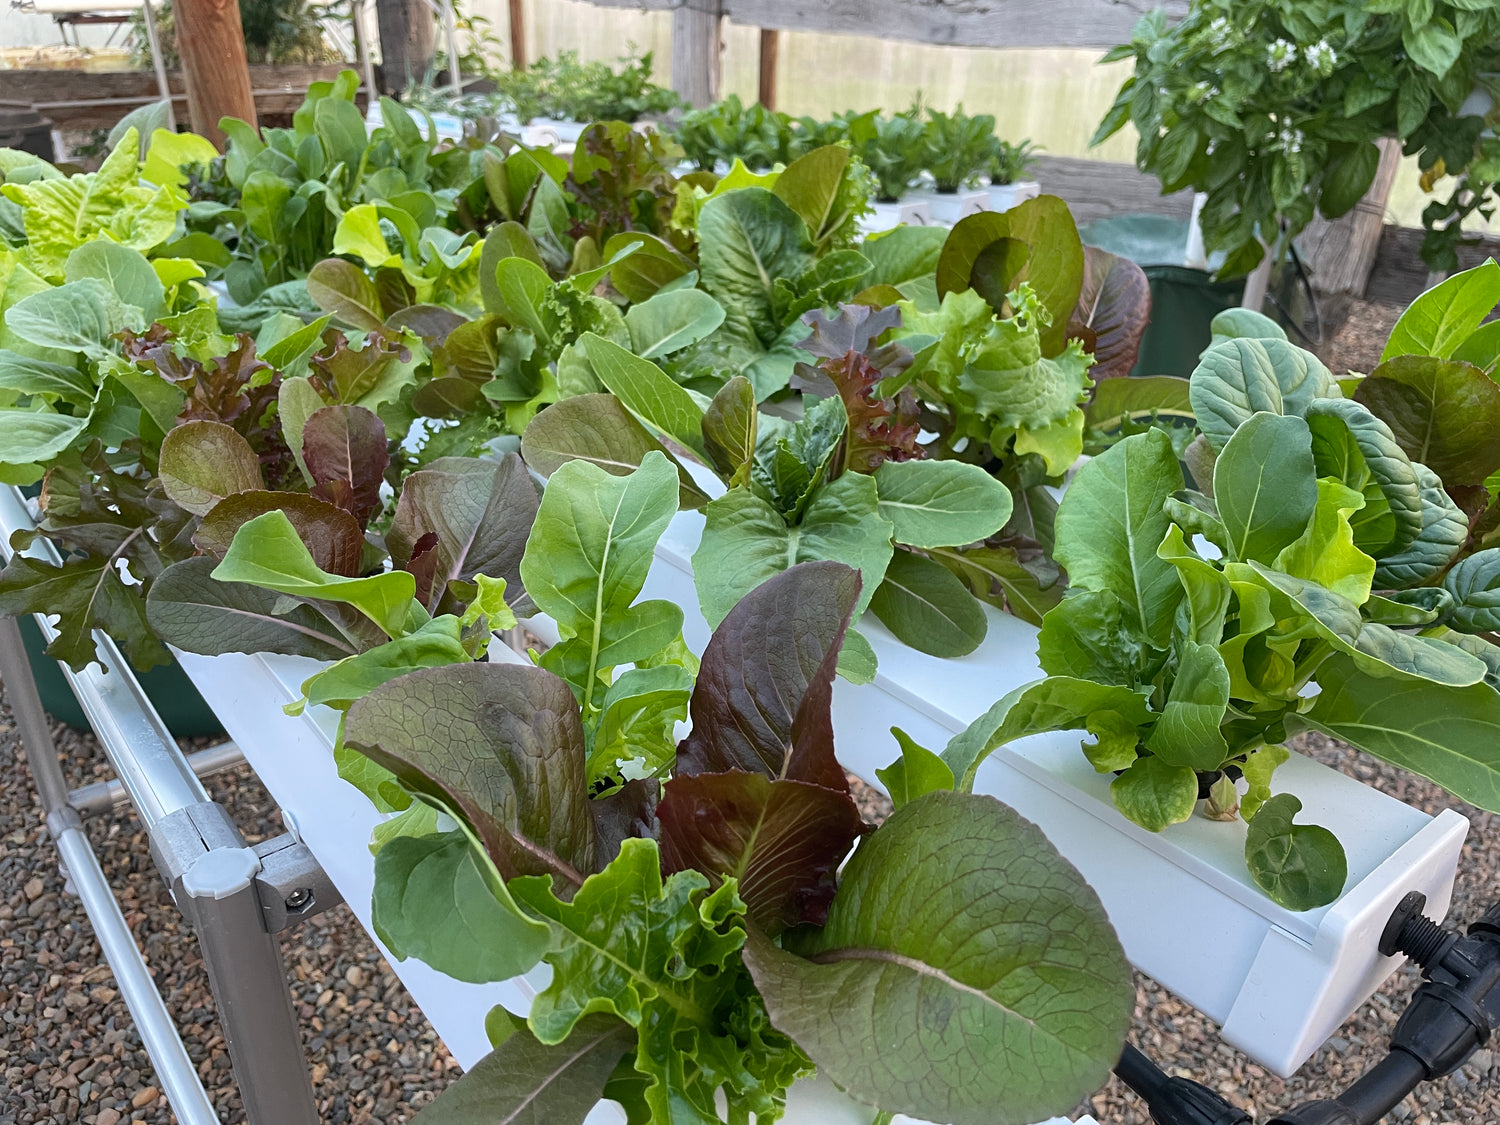 Grow Fresher, Healthier, and More Cost-Effective Veggies on The Salad Table